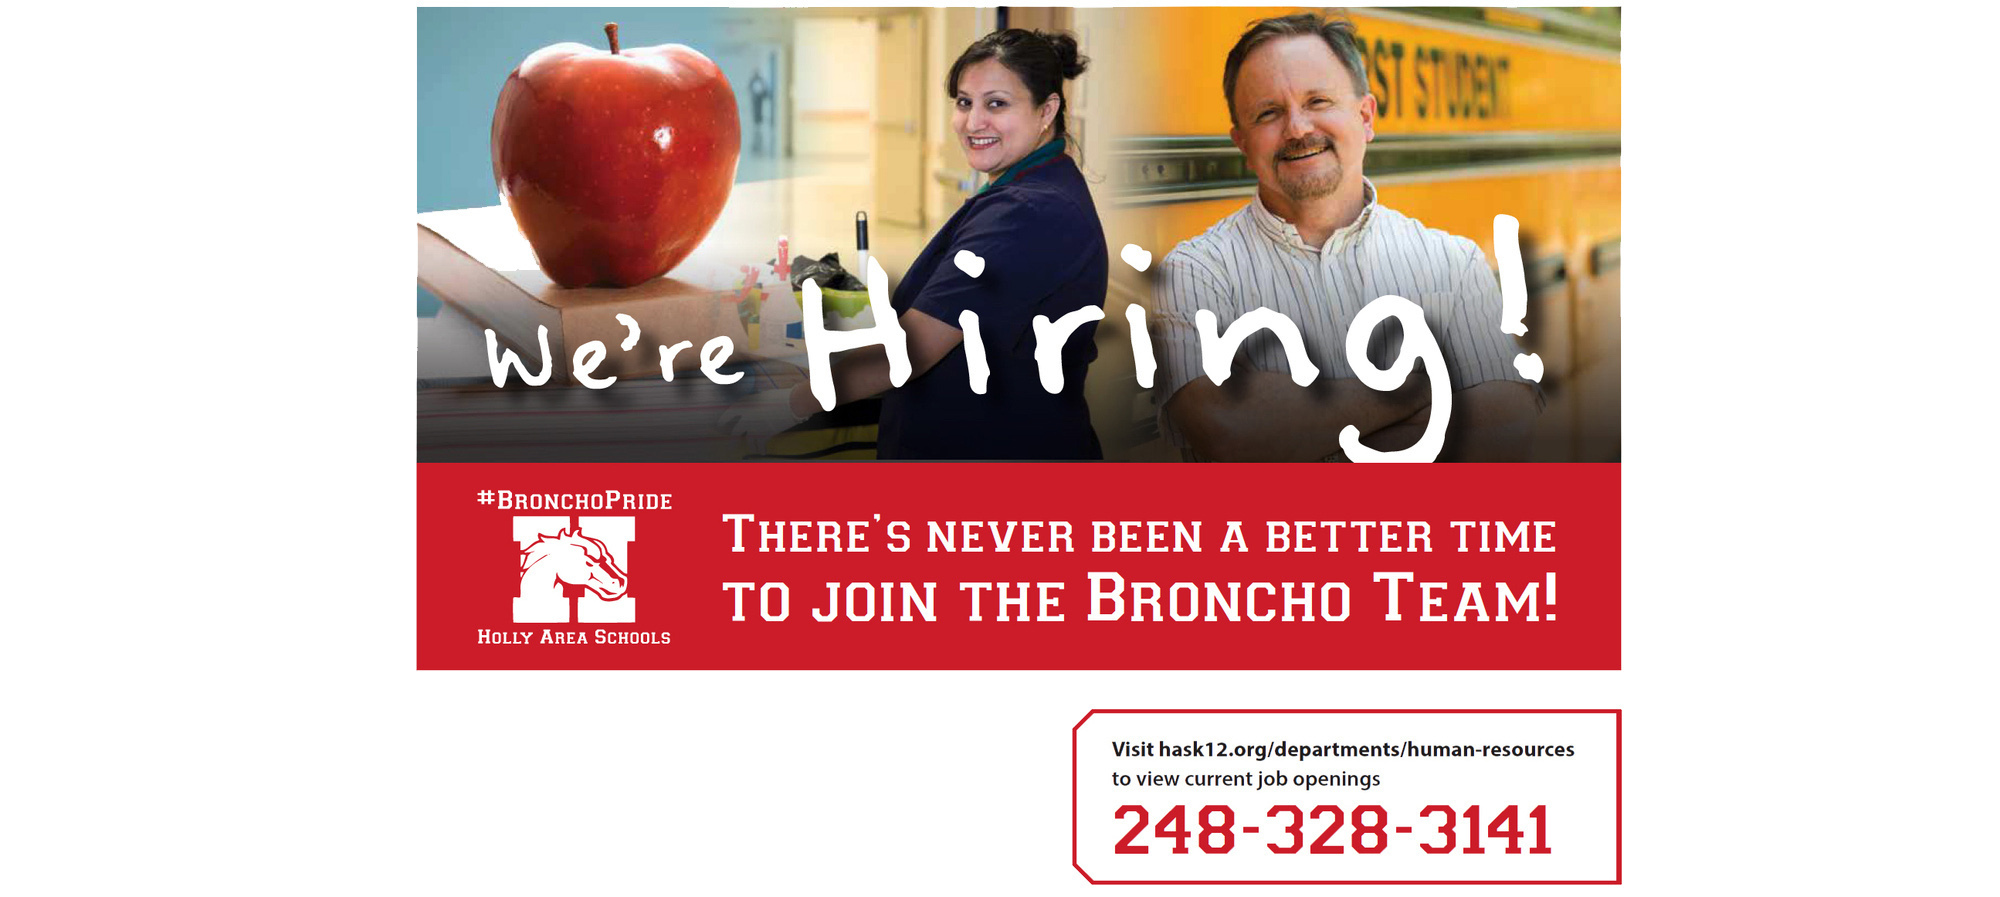 We're hiring! image with "There's never been a better time to join the broncho team